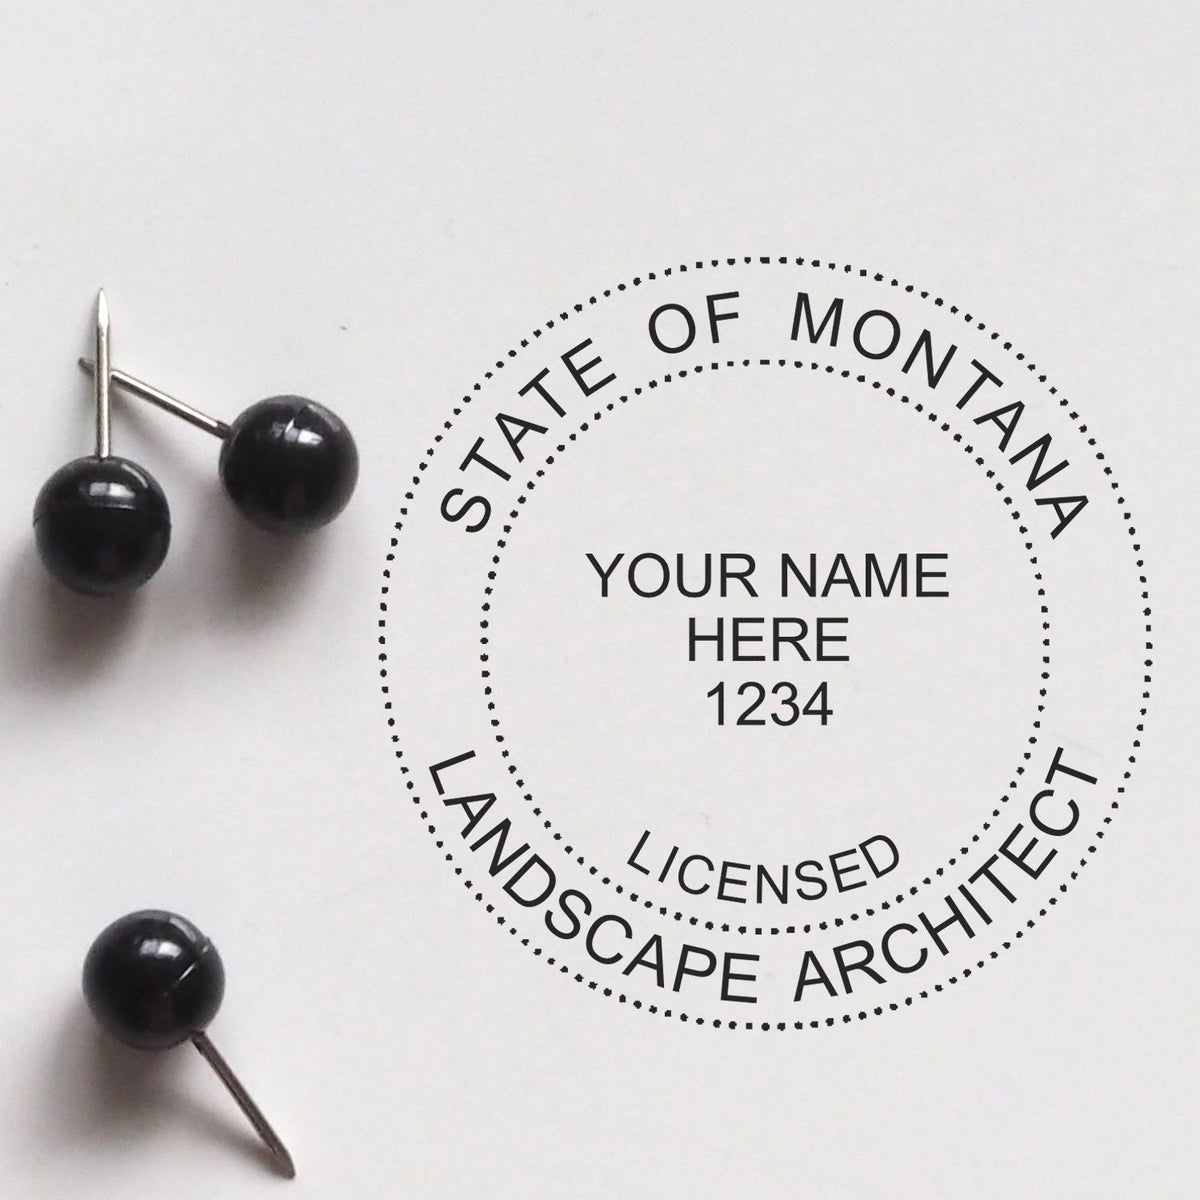 A photograph of the Self-Inking Montana Landscape Architect Stamp stamp impression reveals a vivid, professional image of the on paper.